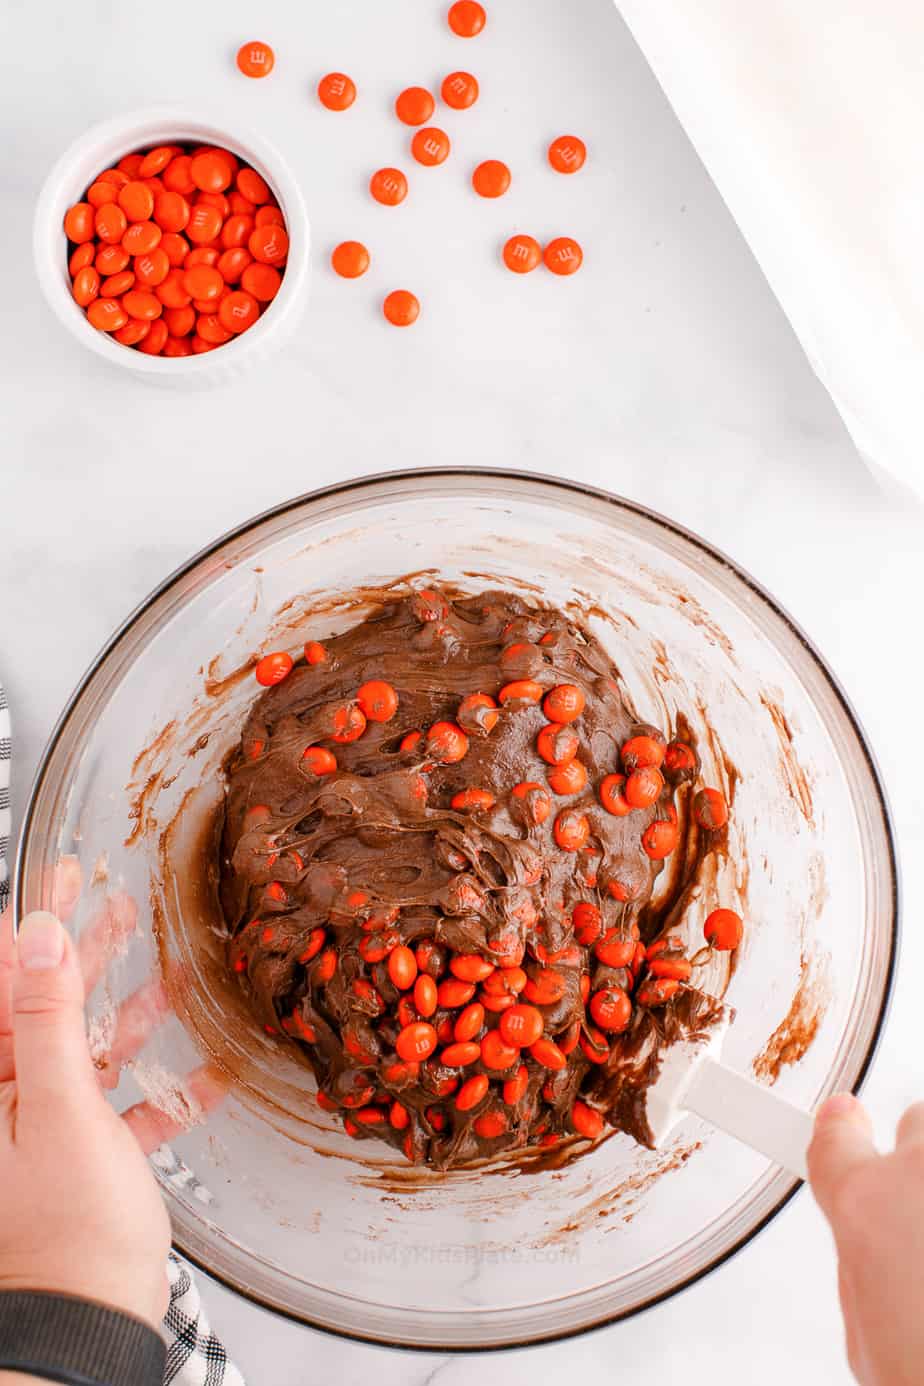 Orange candies being mixed into a cookie dough in a bowl from overhead